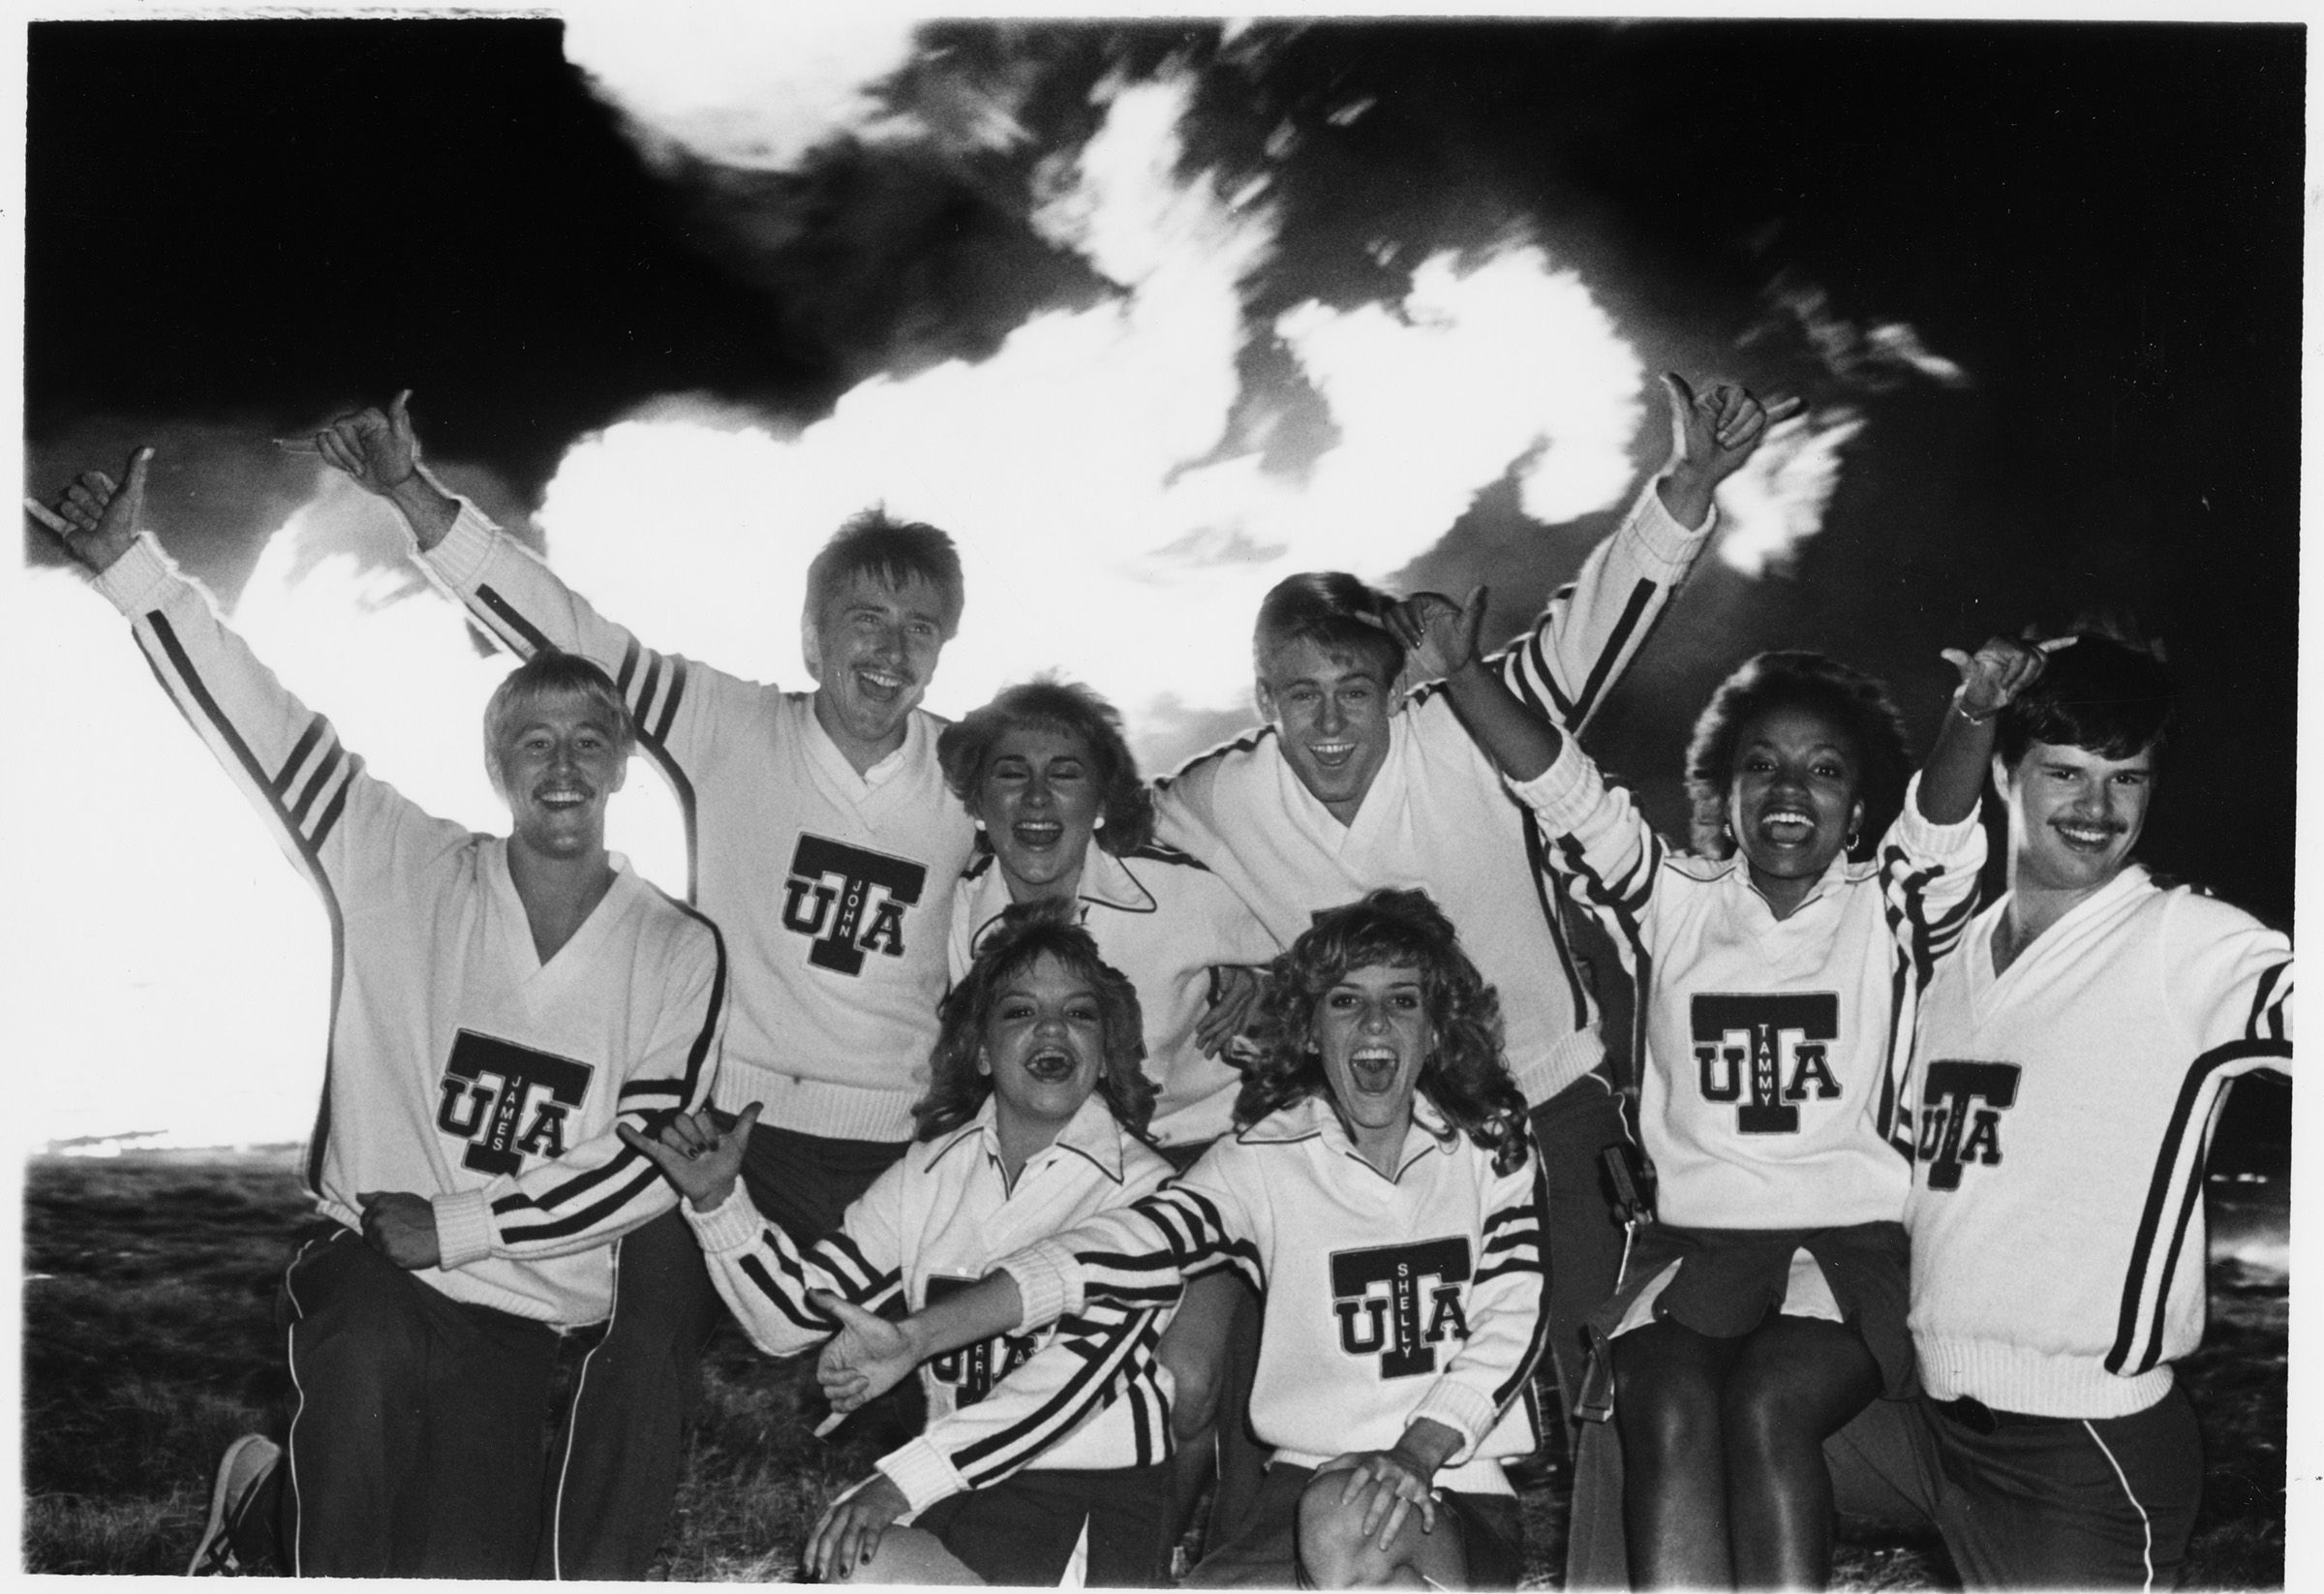 Black and white photo of cheerleaders in front of a bonfire.